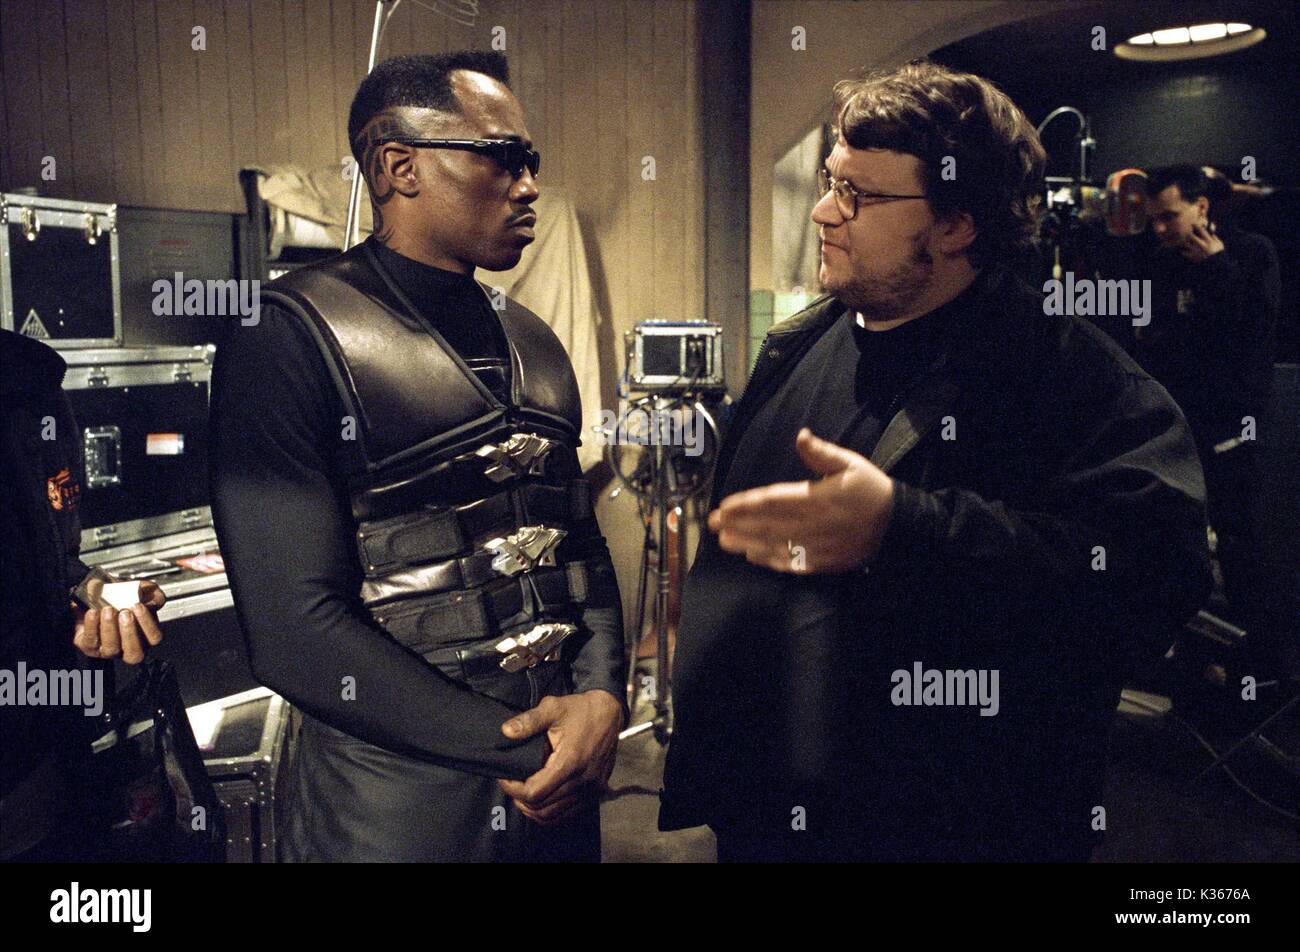 BLADE 2 WESLEY SNIPES AND DIRECTOR, GUILLERMO DEL TORO     Date: 2002 Stock Photo